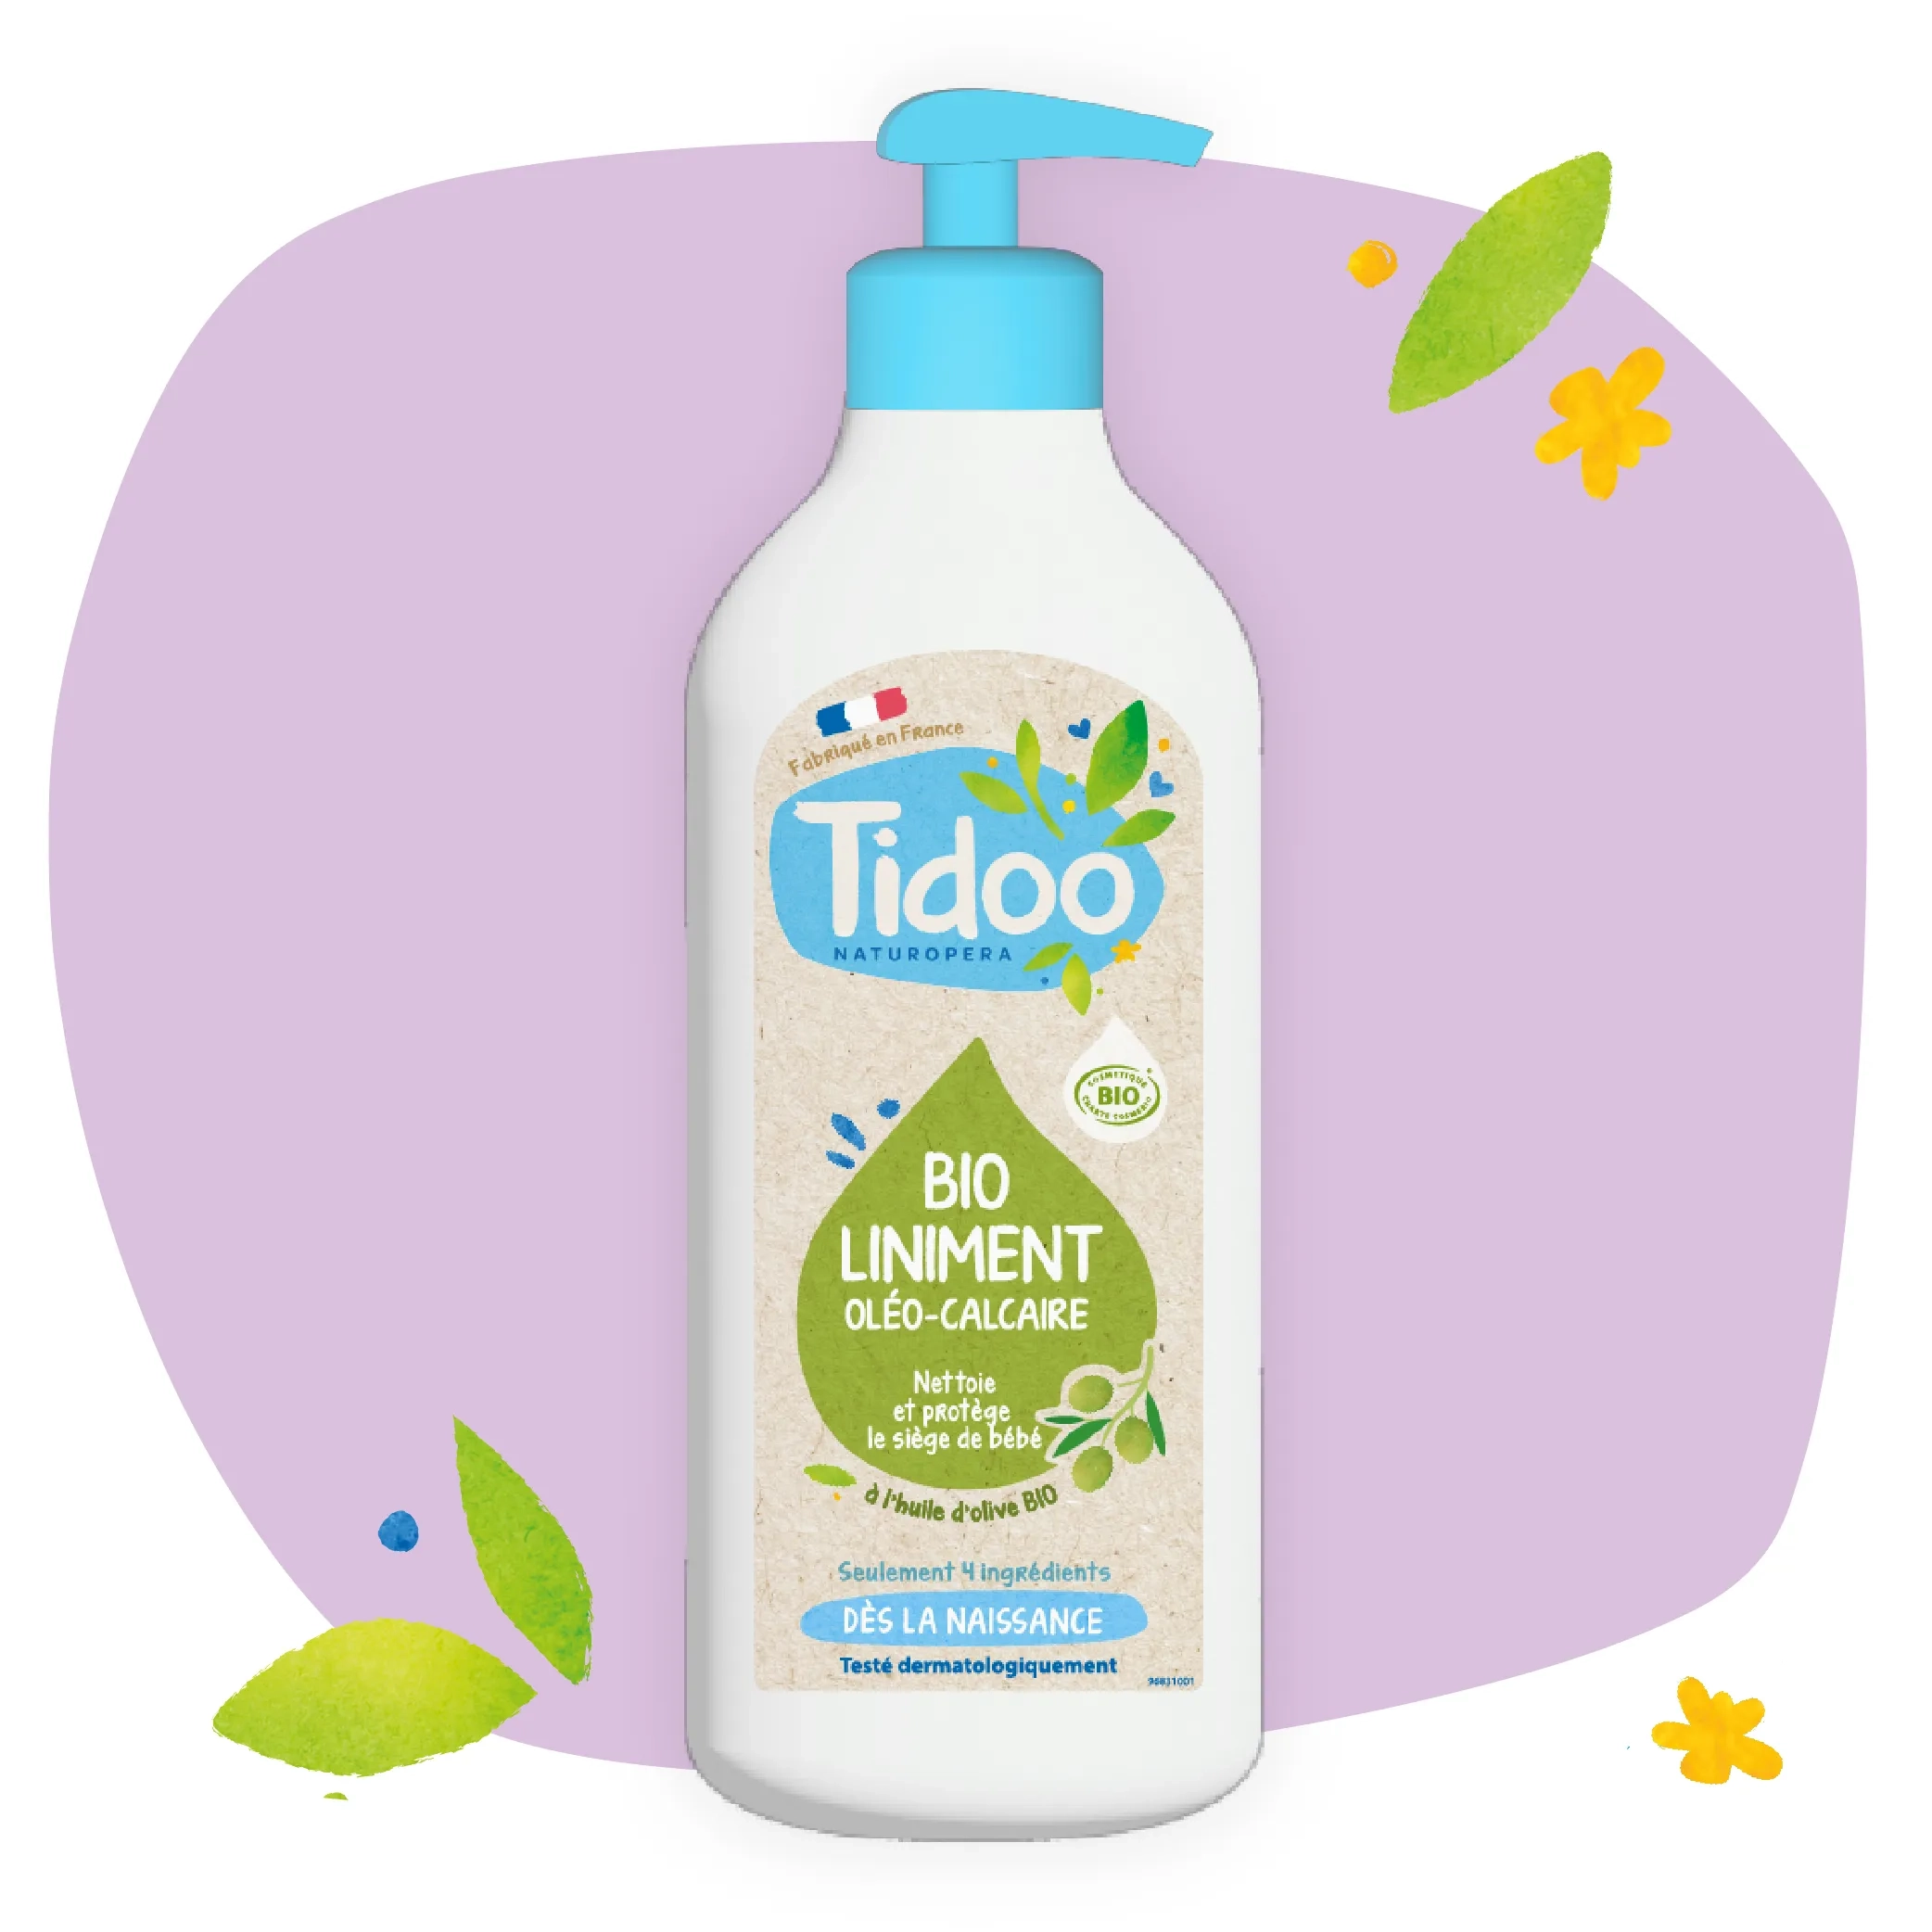 Le liniment oléo-calcaire bio made in France - Tidoo